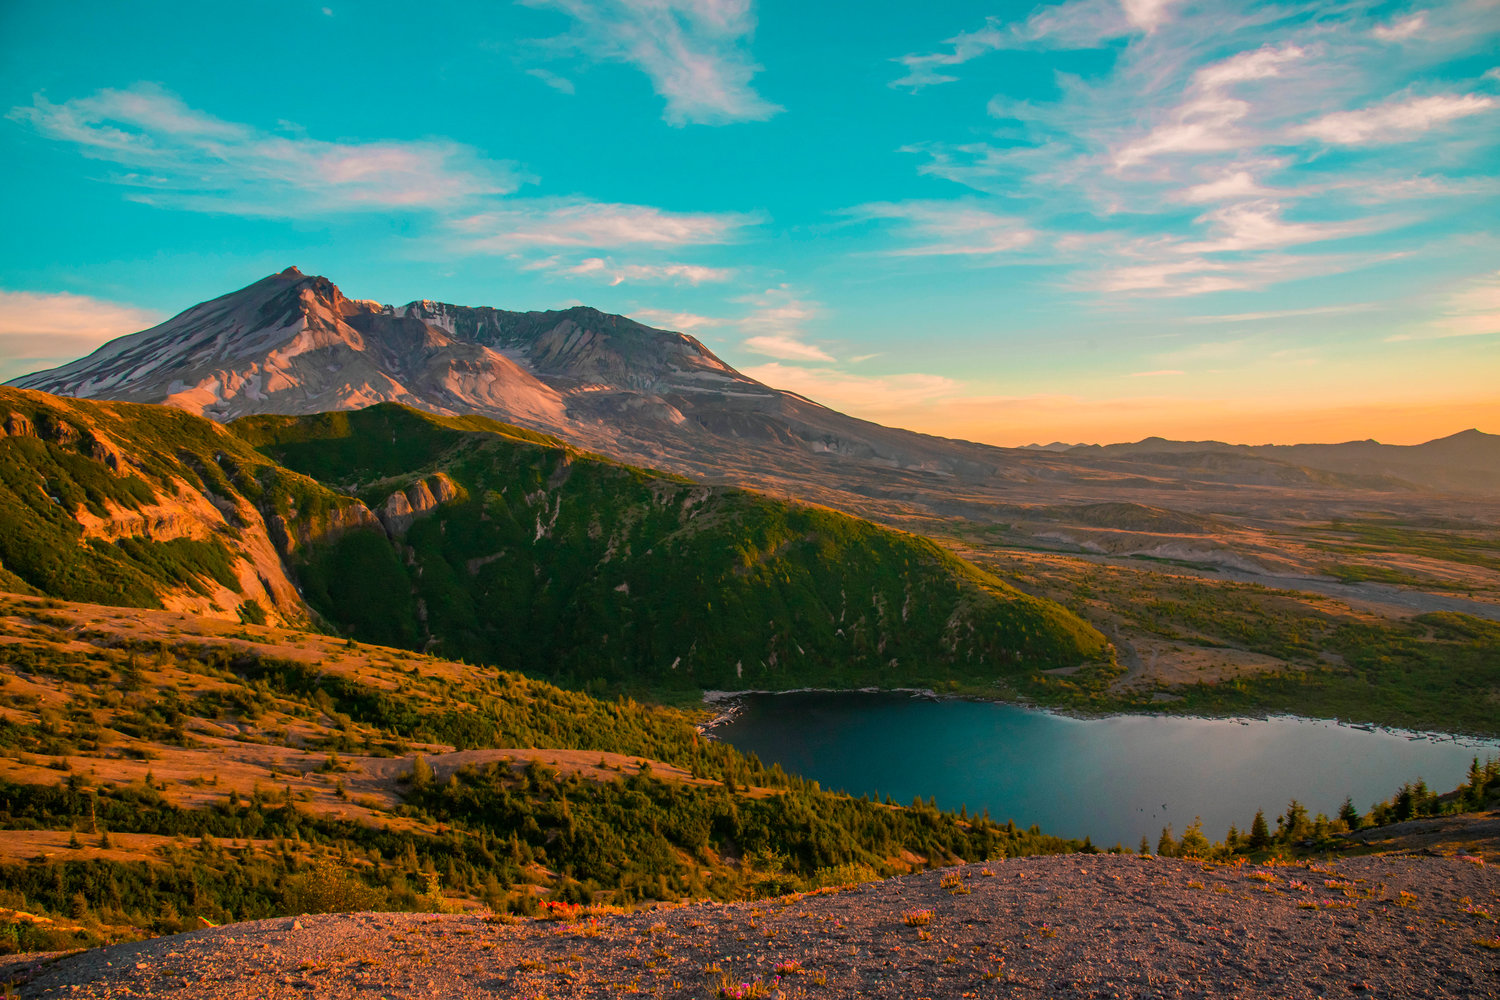 Mount St. Helens and Spirit Lake are seen from the Windy Ridge Trail at sunset on Thursday.